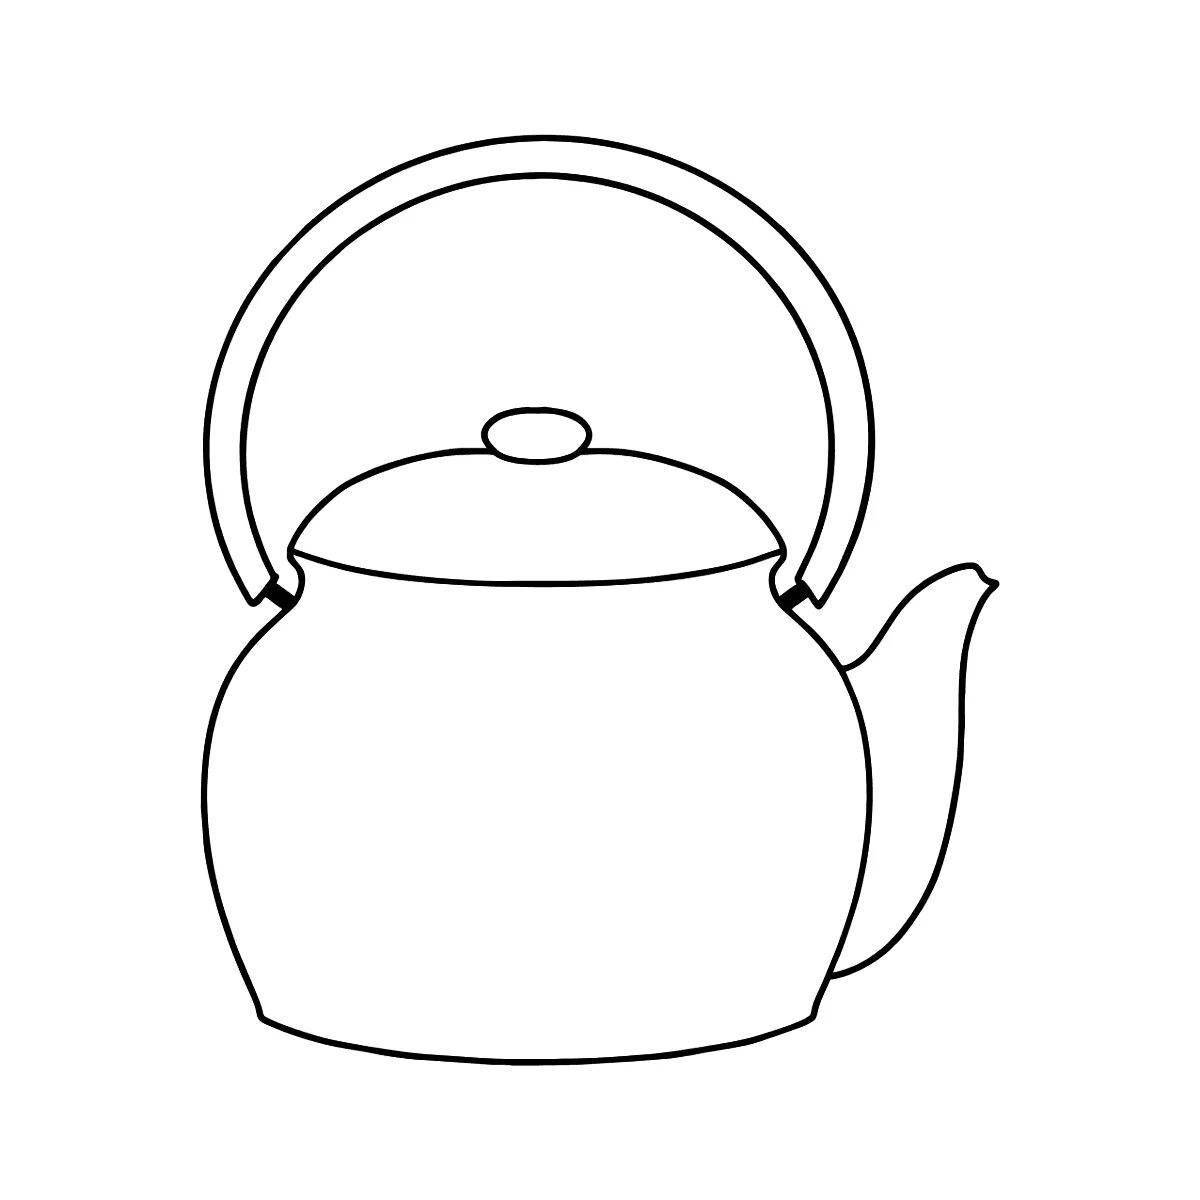 Amazing coloring book electric kettle for kids